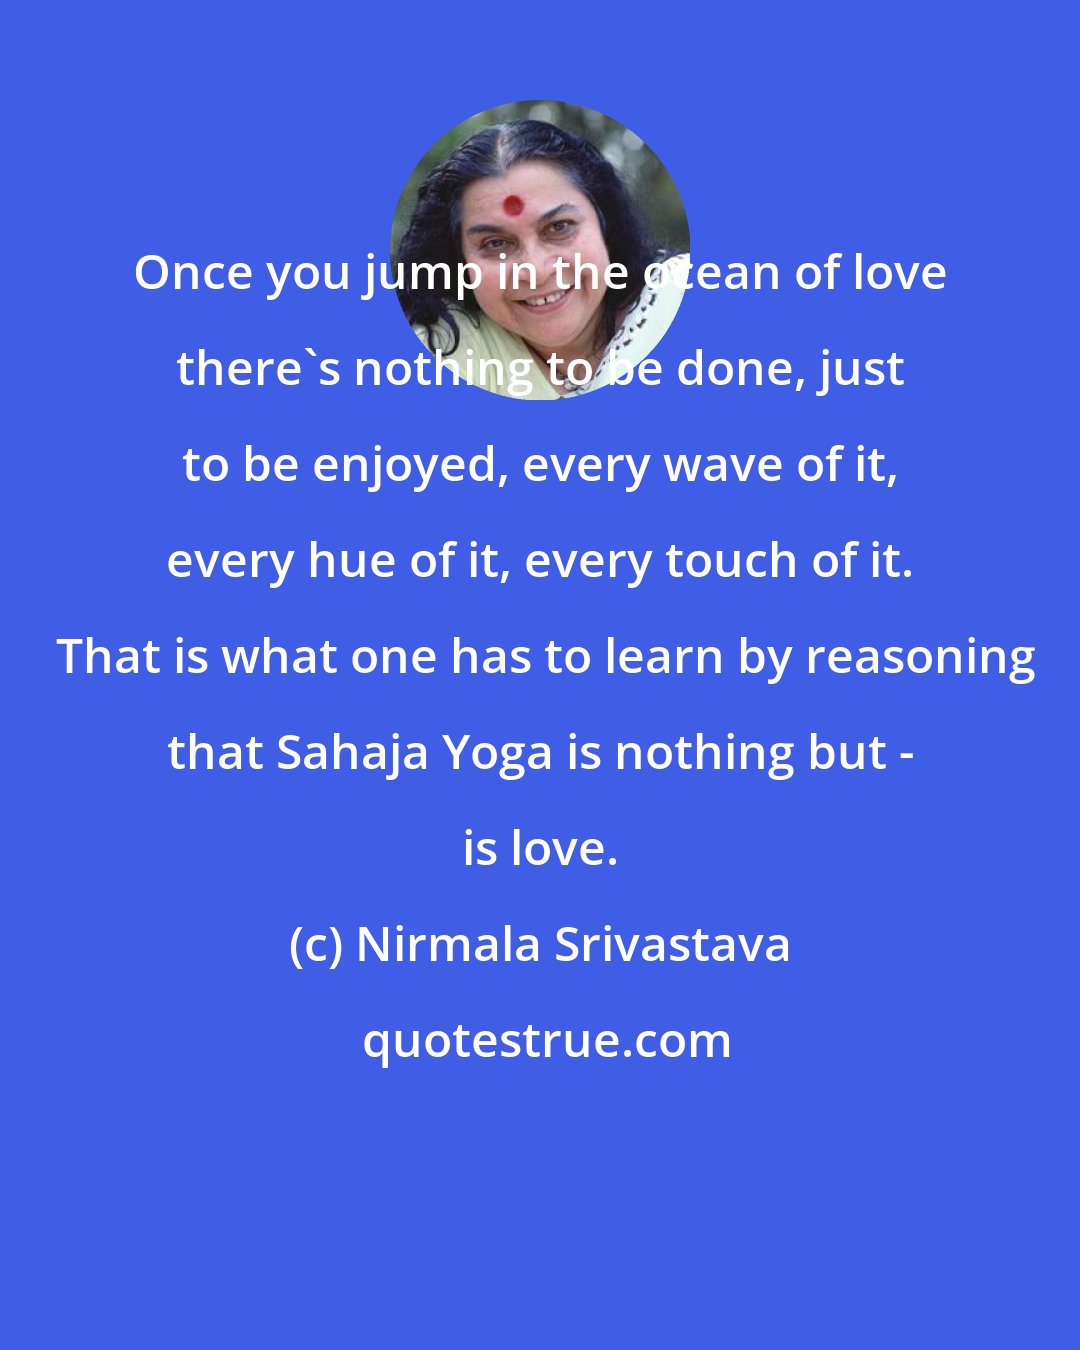 Nirmala Srivastava: Once you jump in the ocean of love there's nothing to be done, just to be enjoyed, every wave of it, every hue of it, every touch of it.  That is what one has to learn by reasoning that Sahaja Yoga is nothing but - is love.